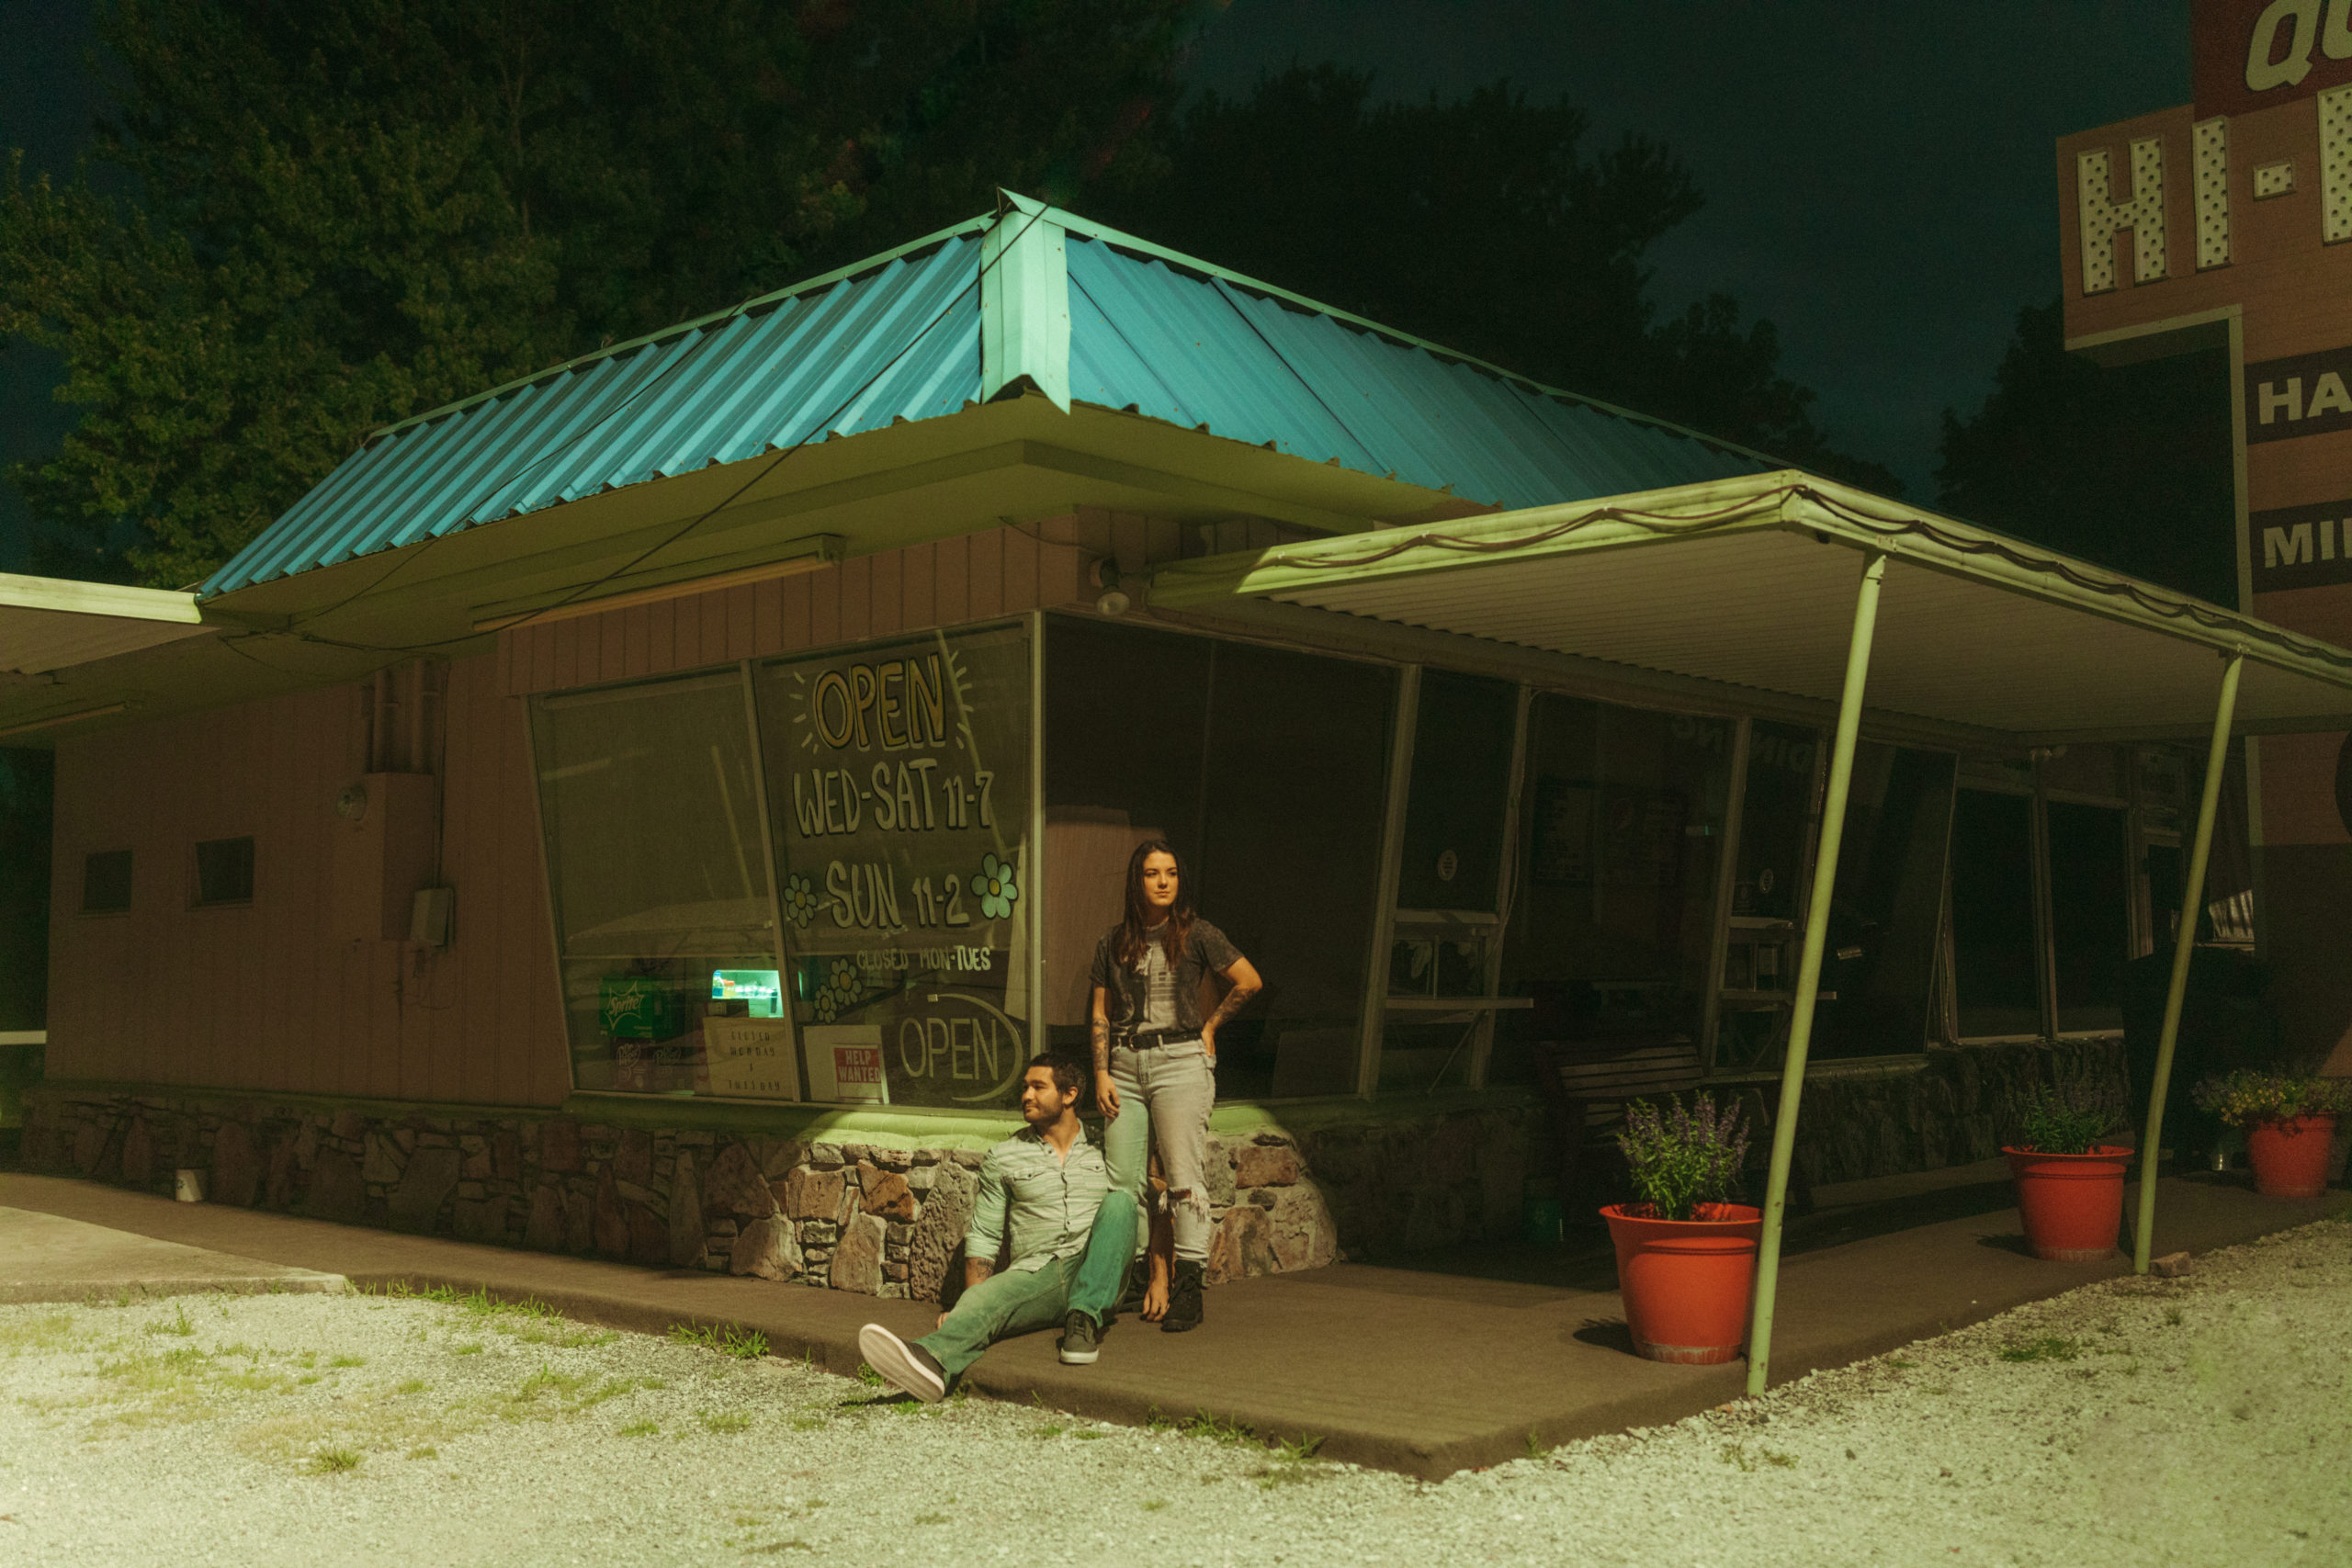 Cute couple standing outside an old vintage diner under the stars.